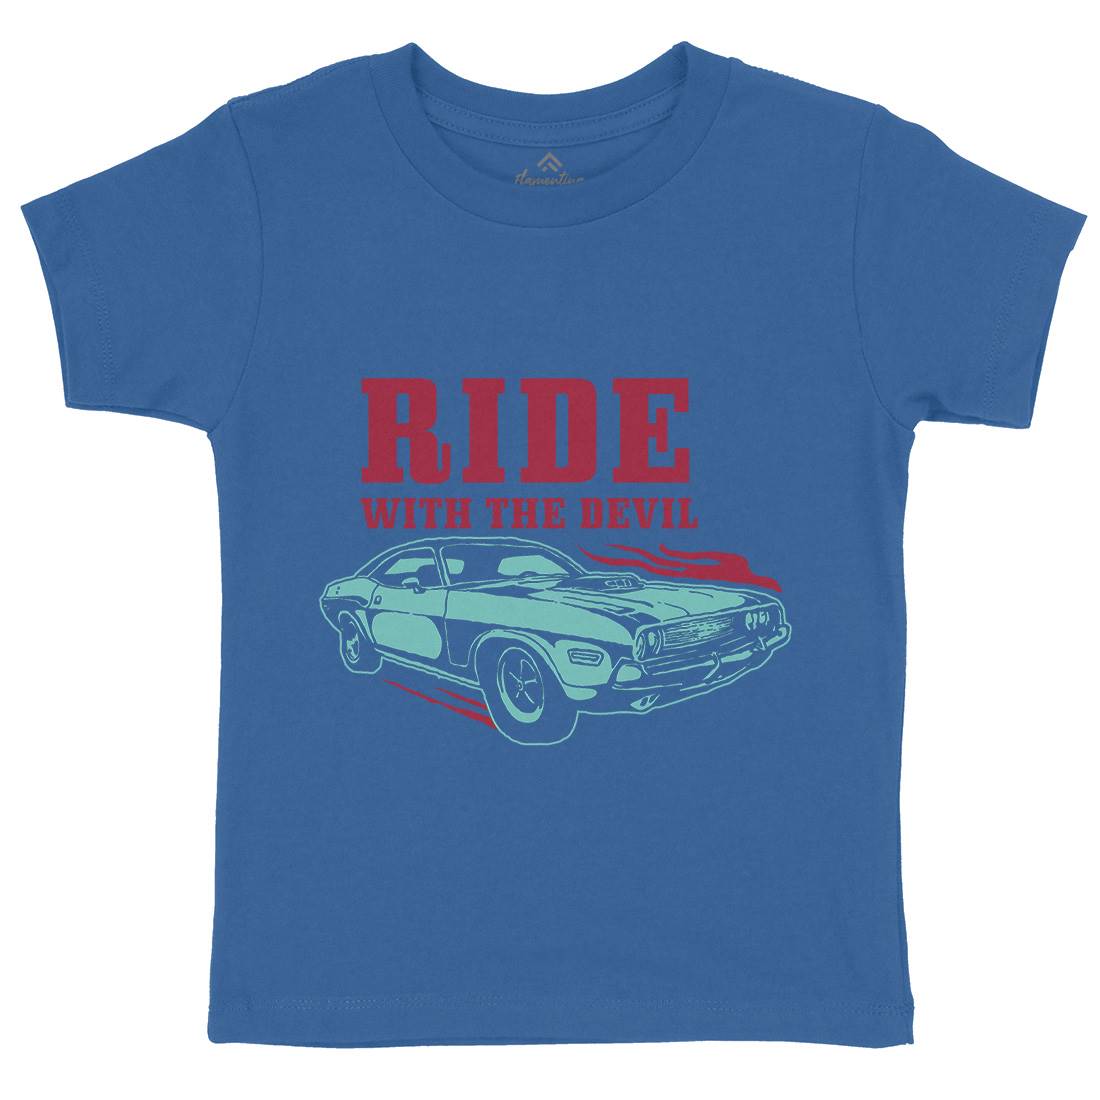 Ride With Devil Kids Organic Crew Neck T-Shirt Cars A461